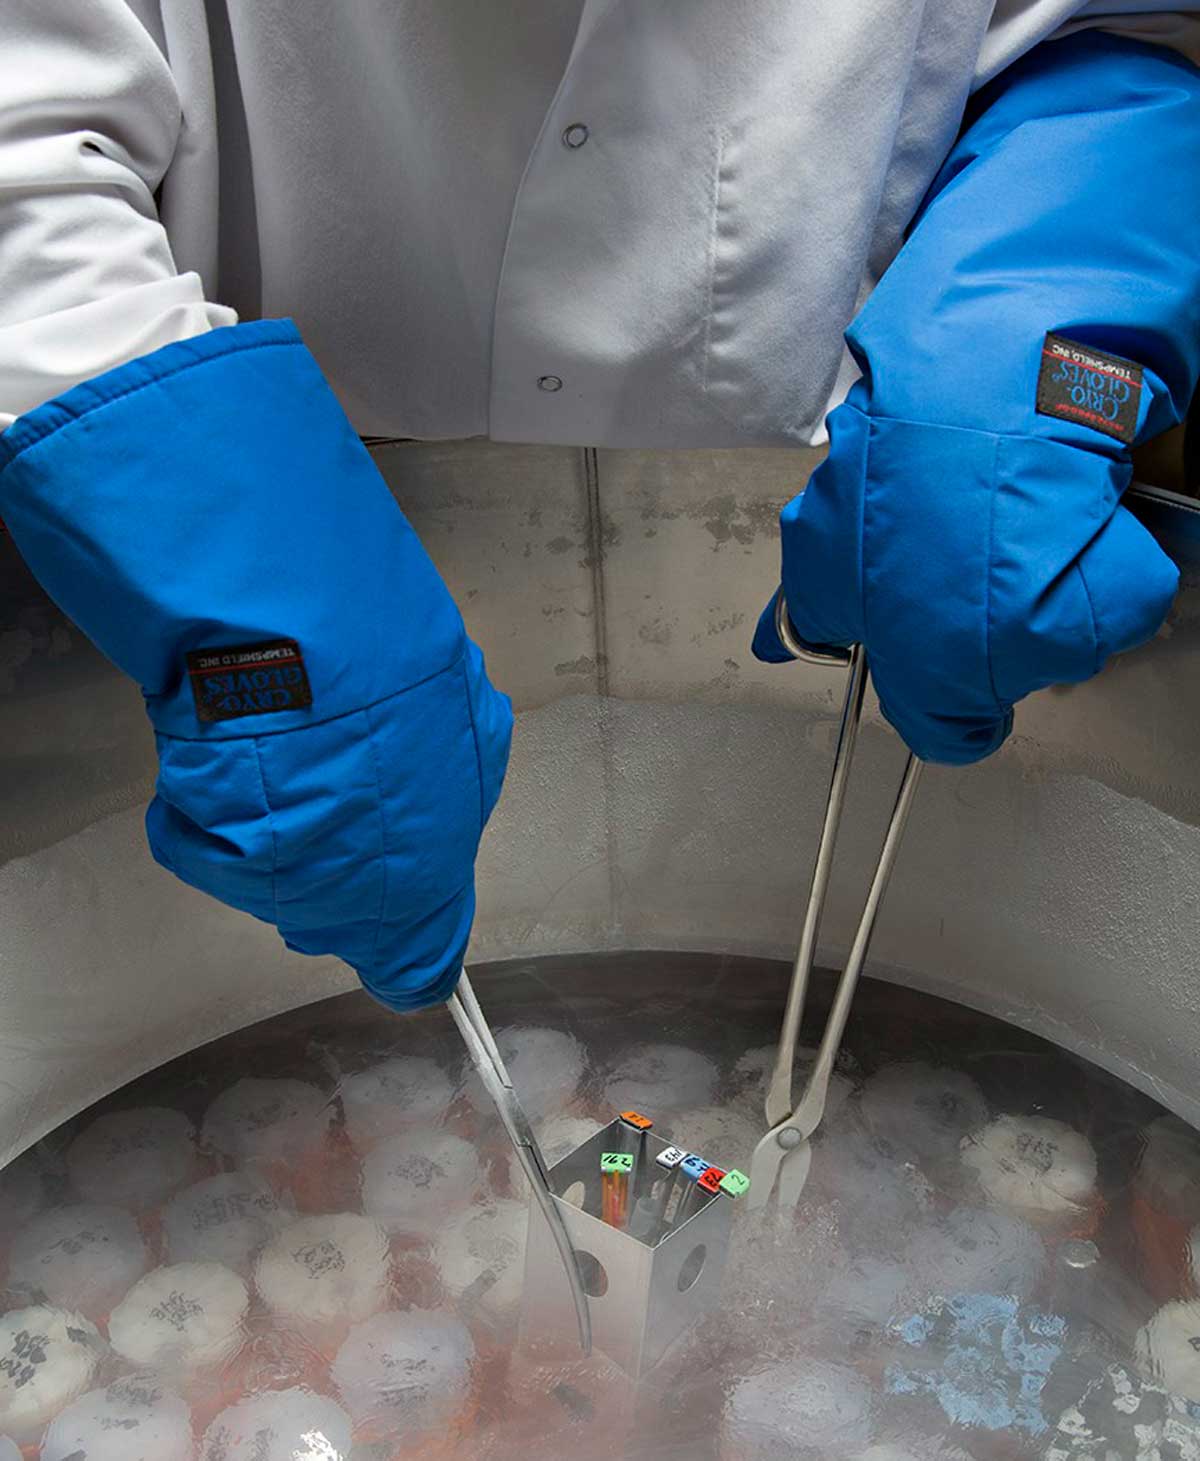 What is Liquid Nitrogen its uses and disadvantages